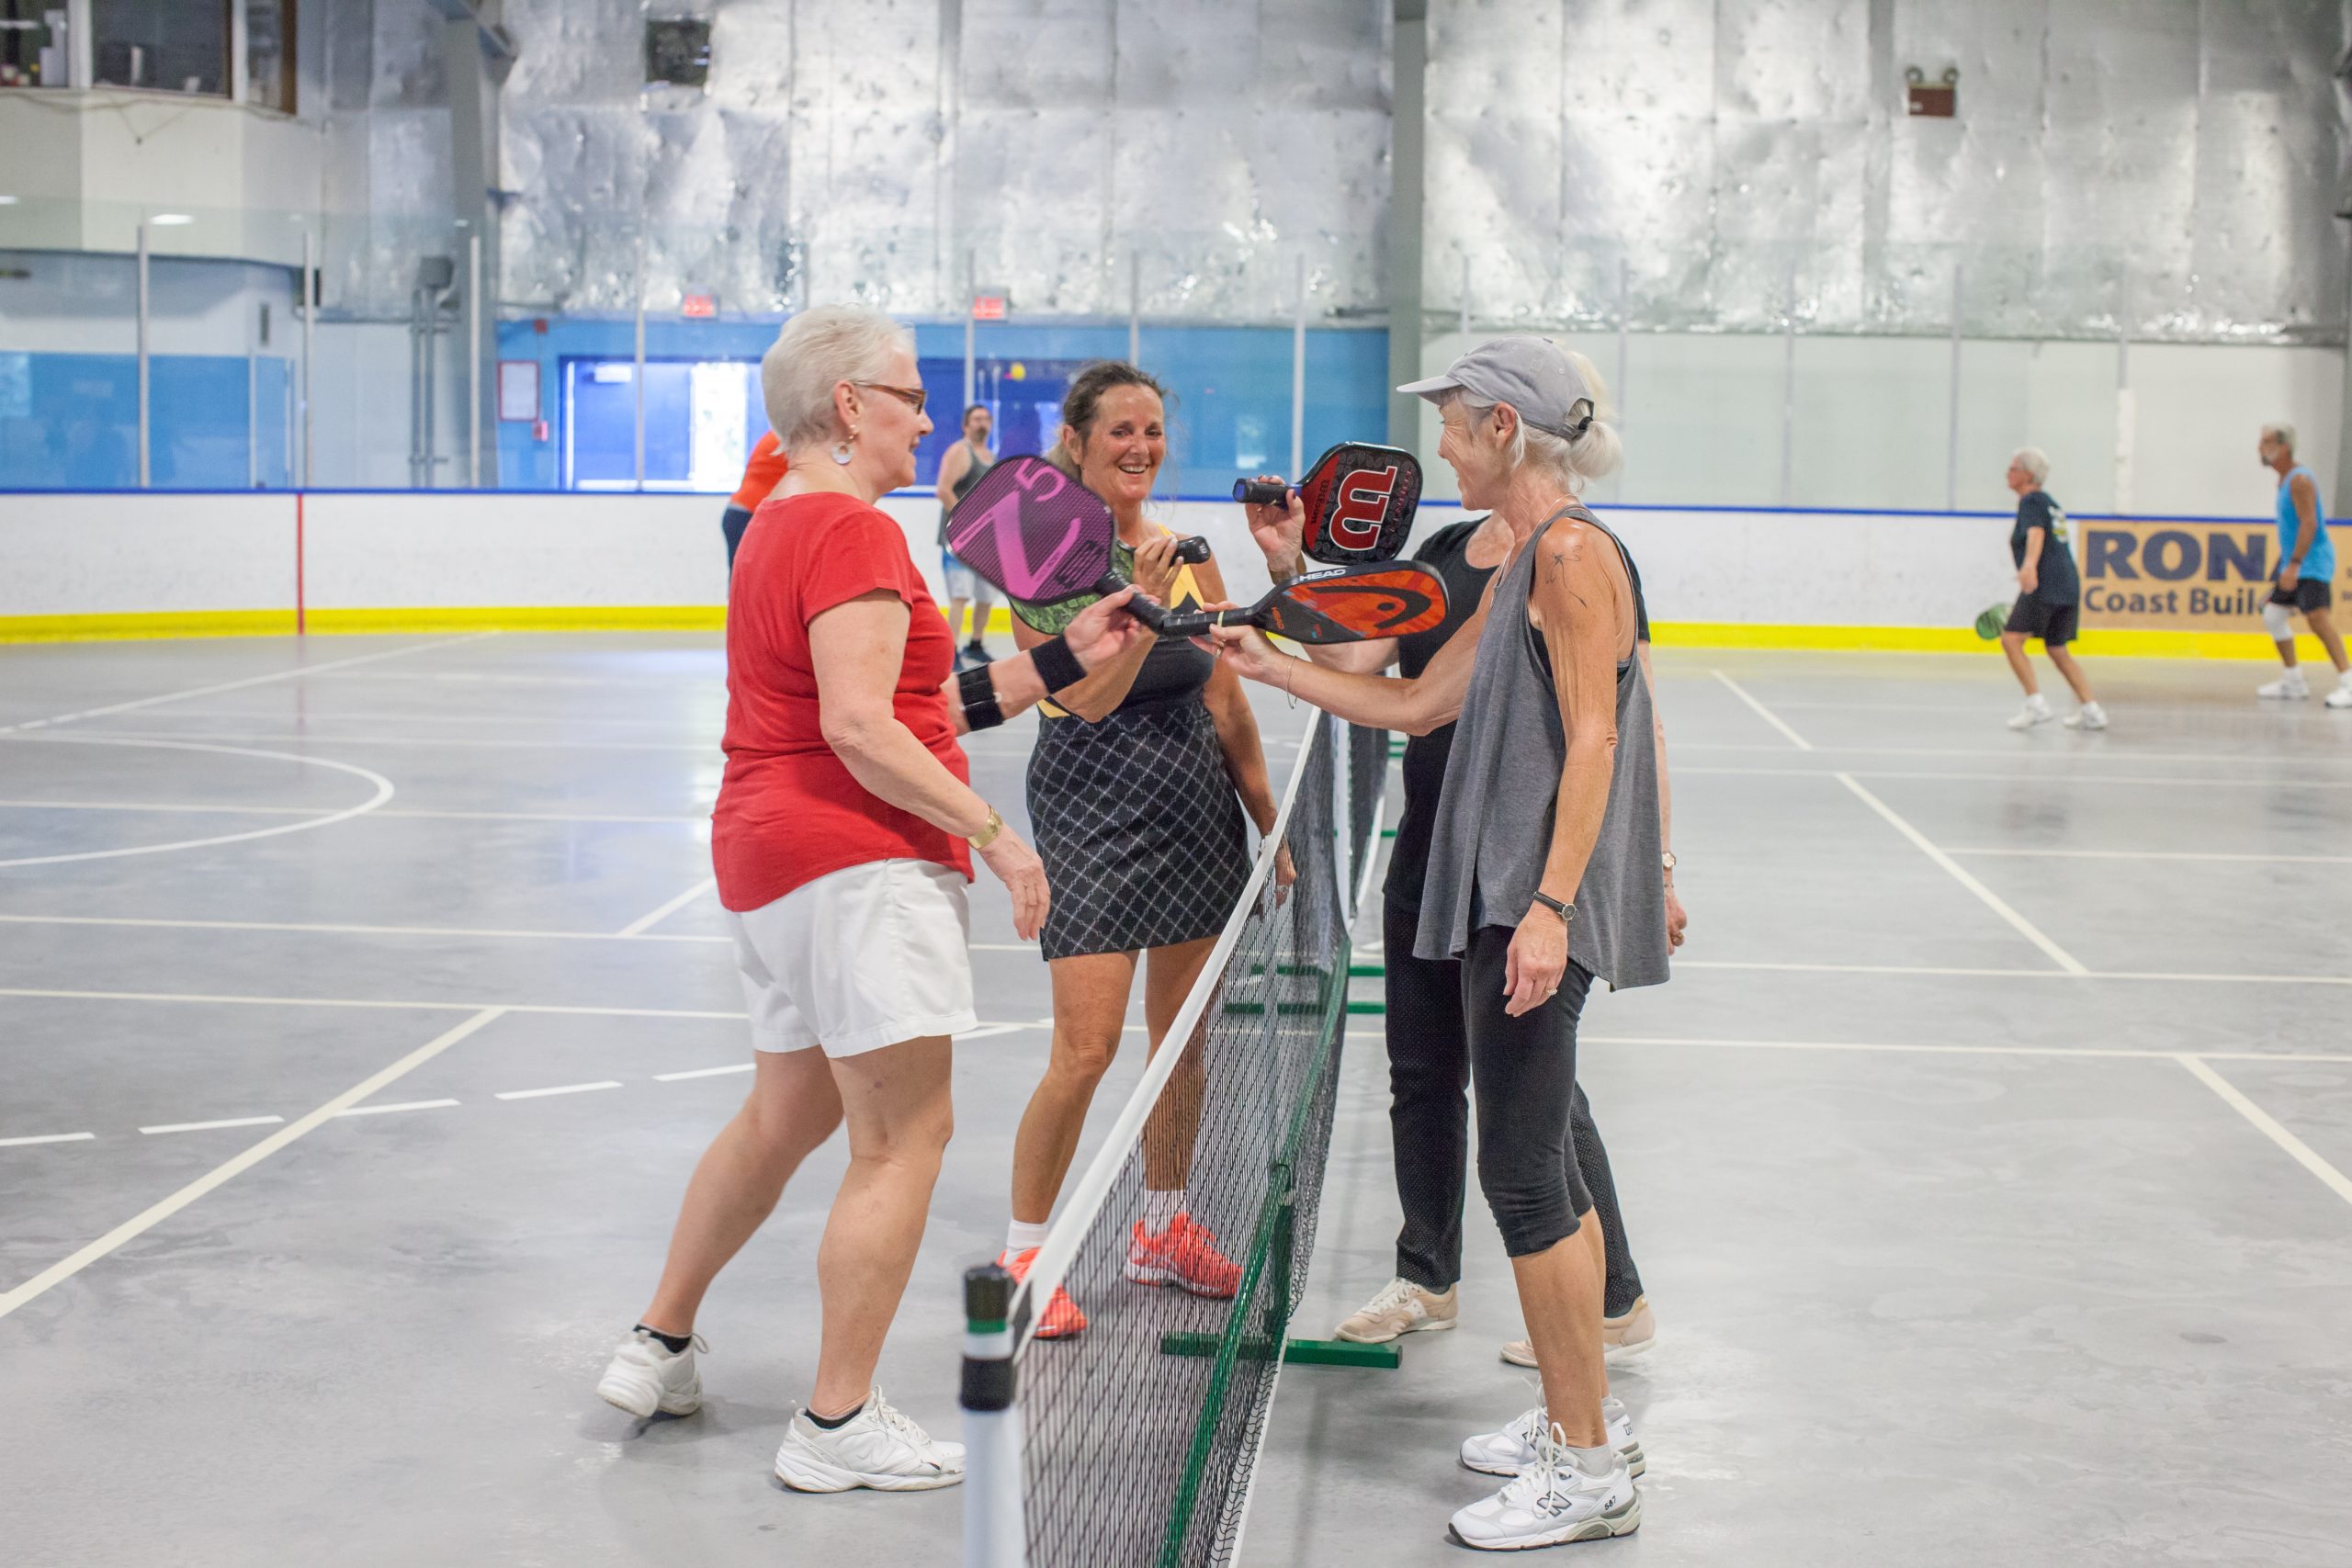 four people meet at the net after plying pickleball